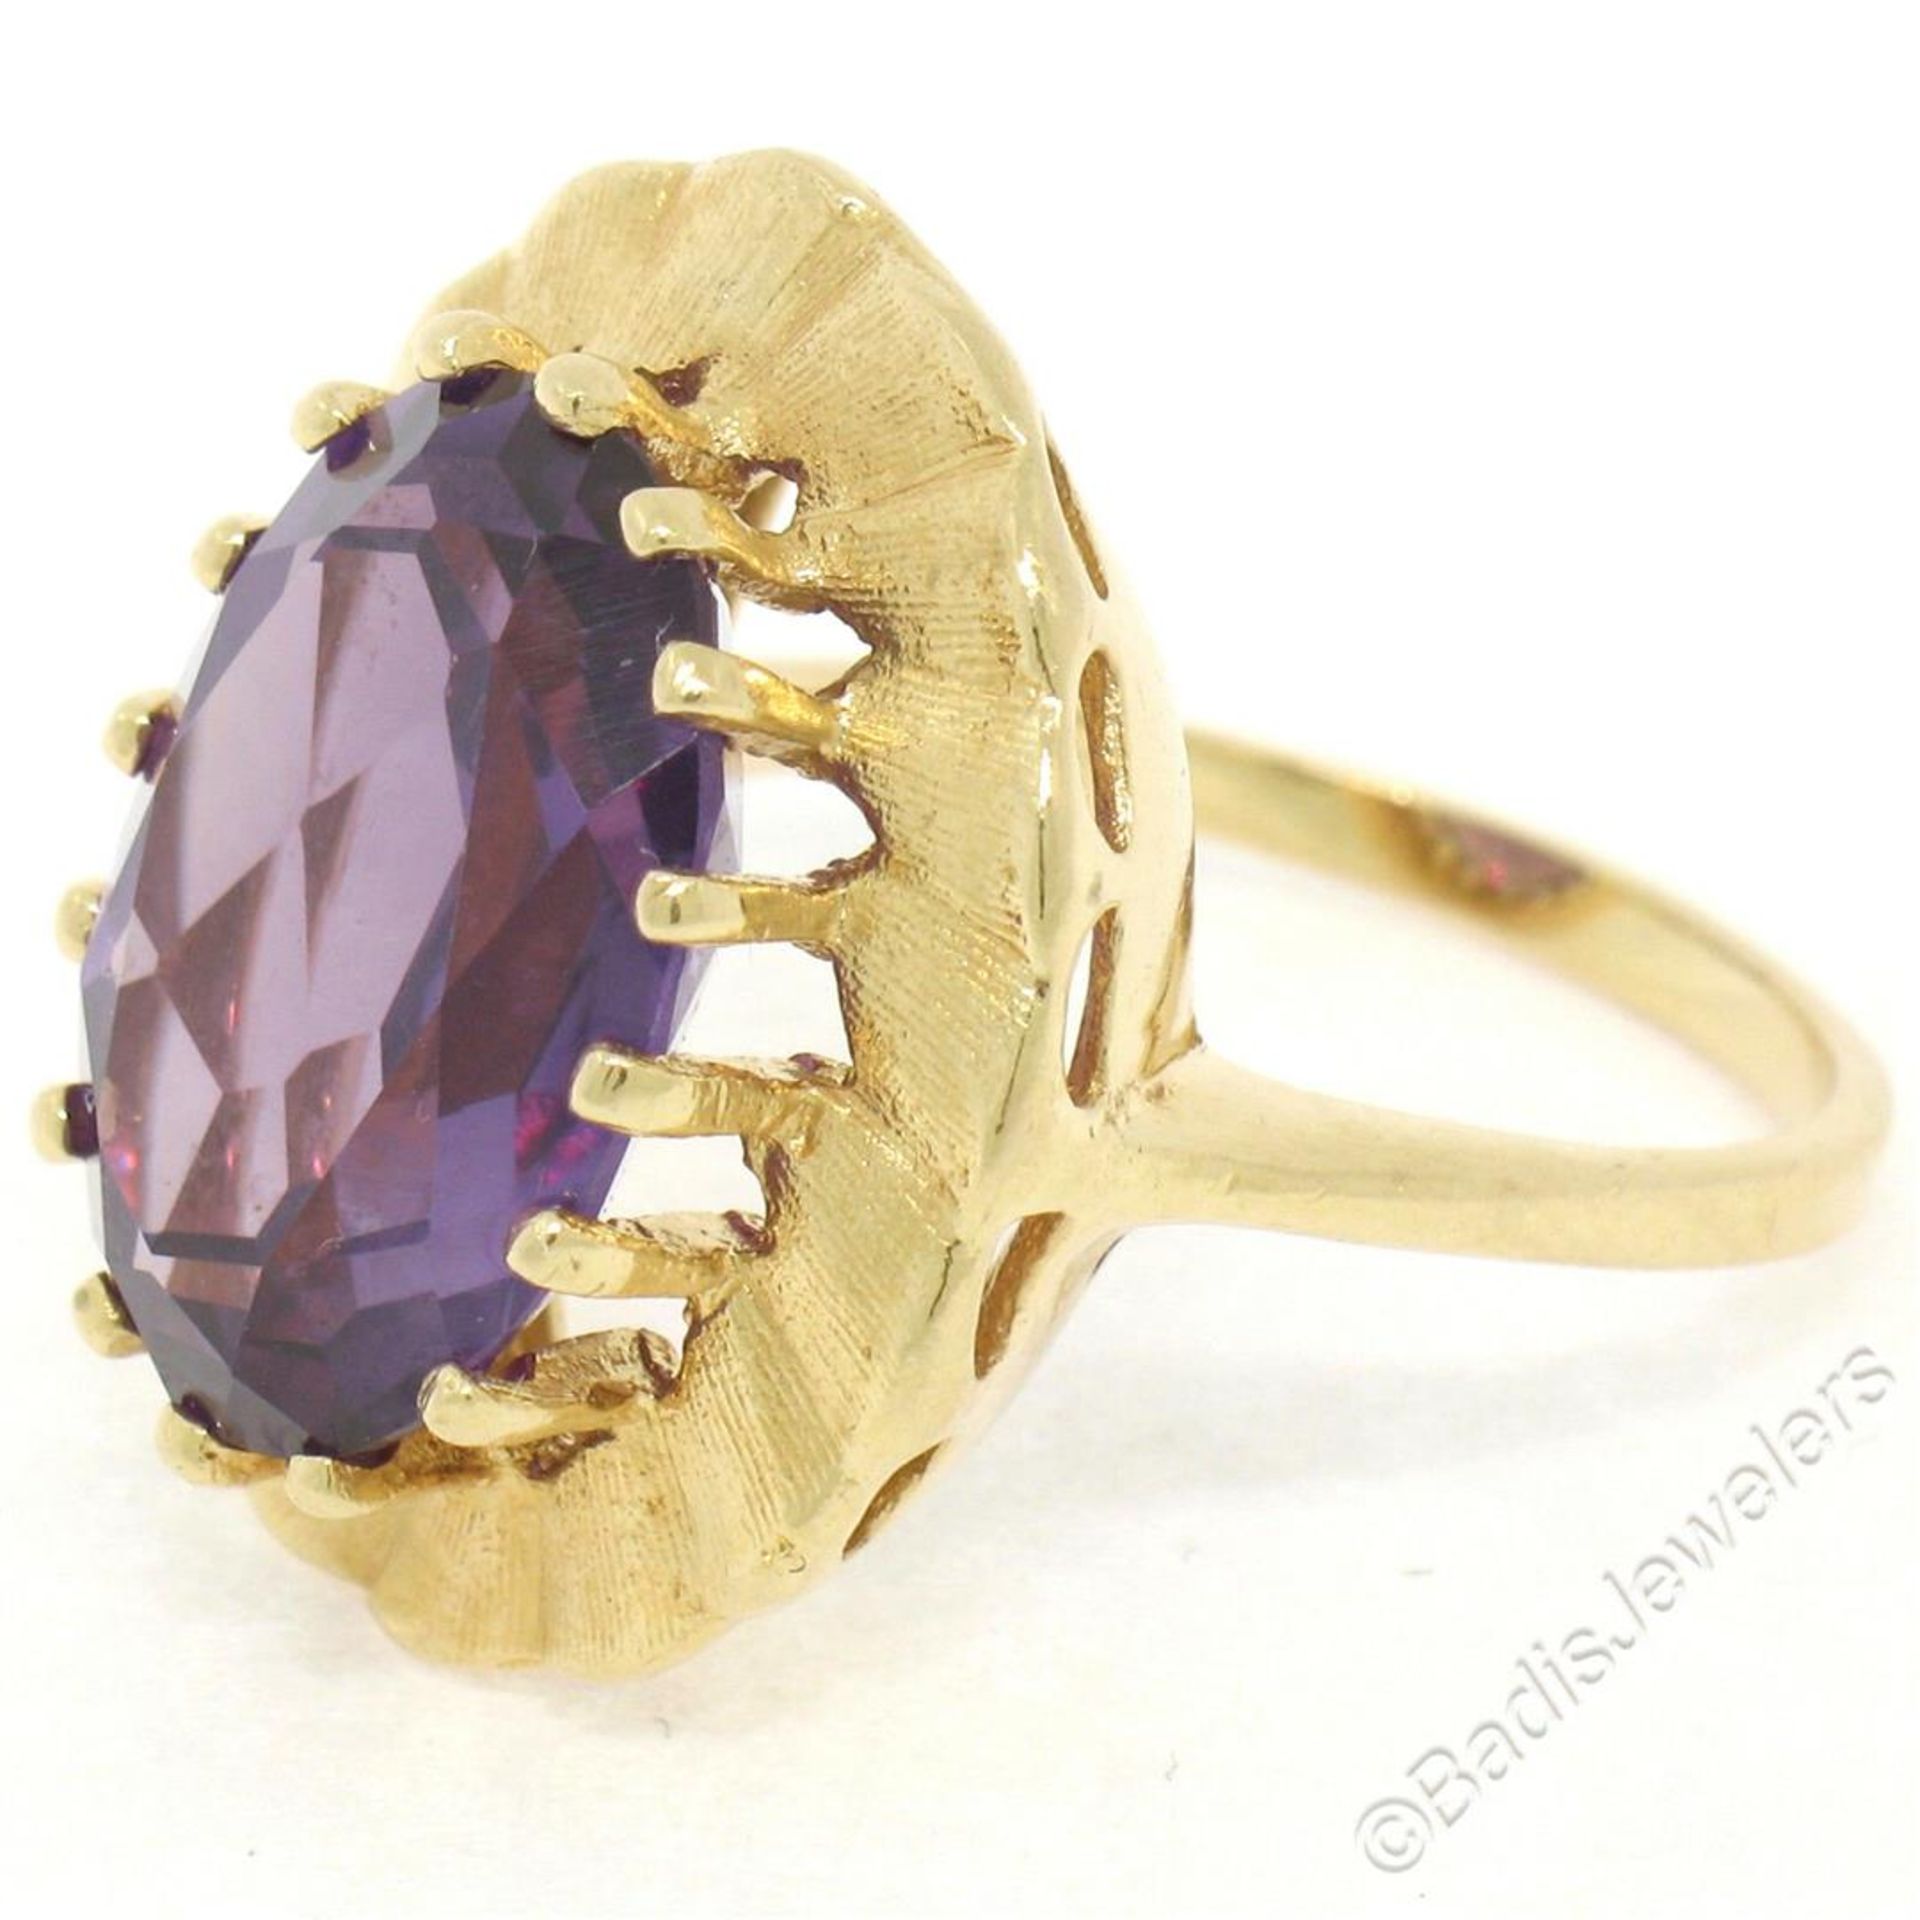 Vintage 14kt Yellow Gold Oval Synthetic Alexandrite Ring w/ Textured Halo - Image 6 of 9